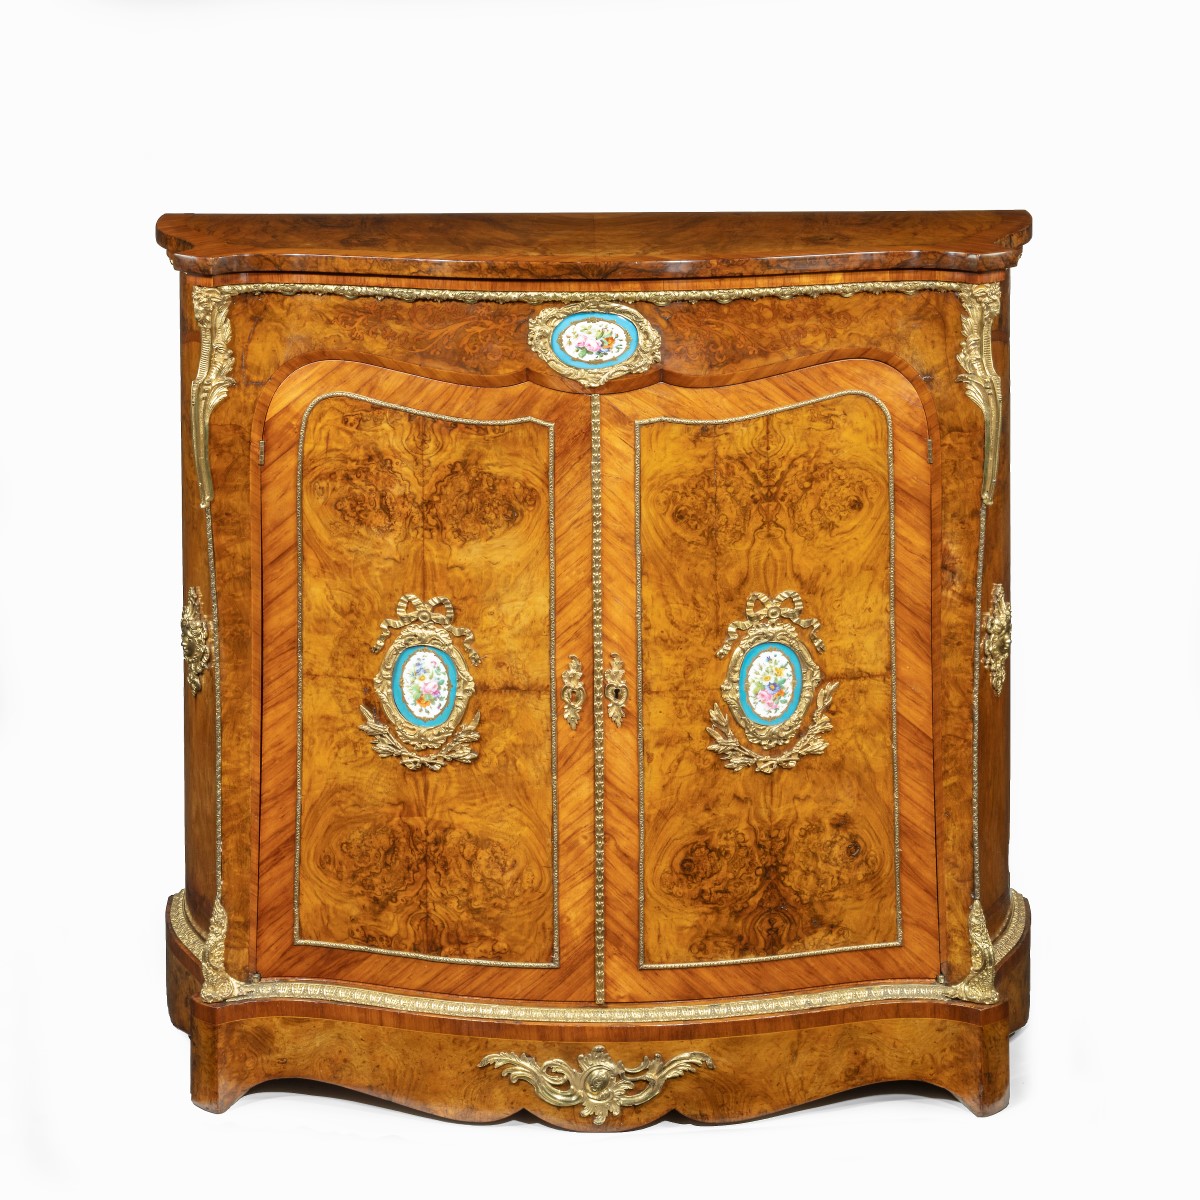 A Regency rosewood and gilt brass mounted book stand, attributed to Gillows